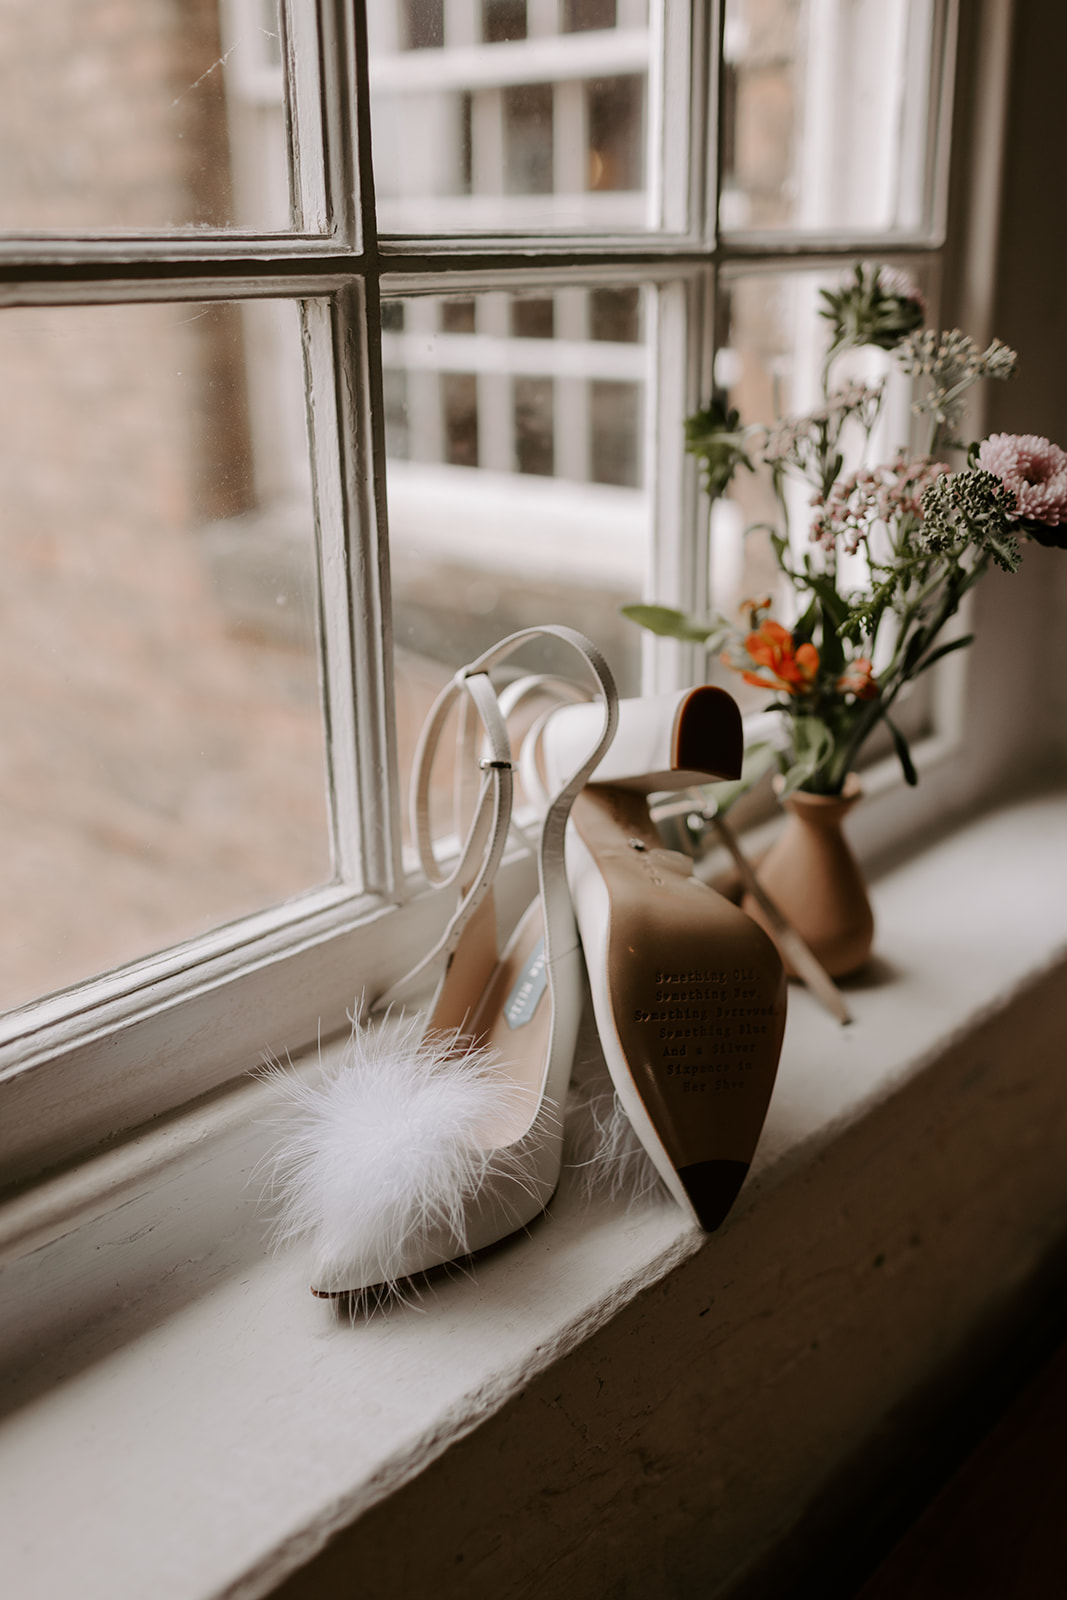 wedding shoes and flowers